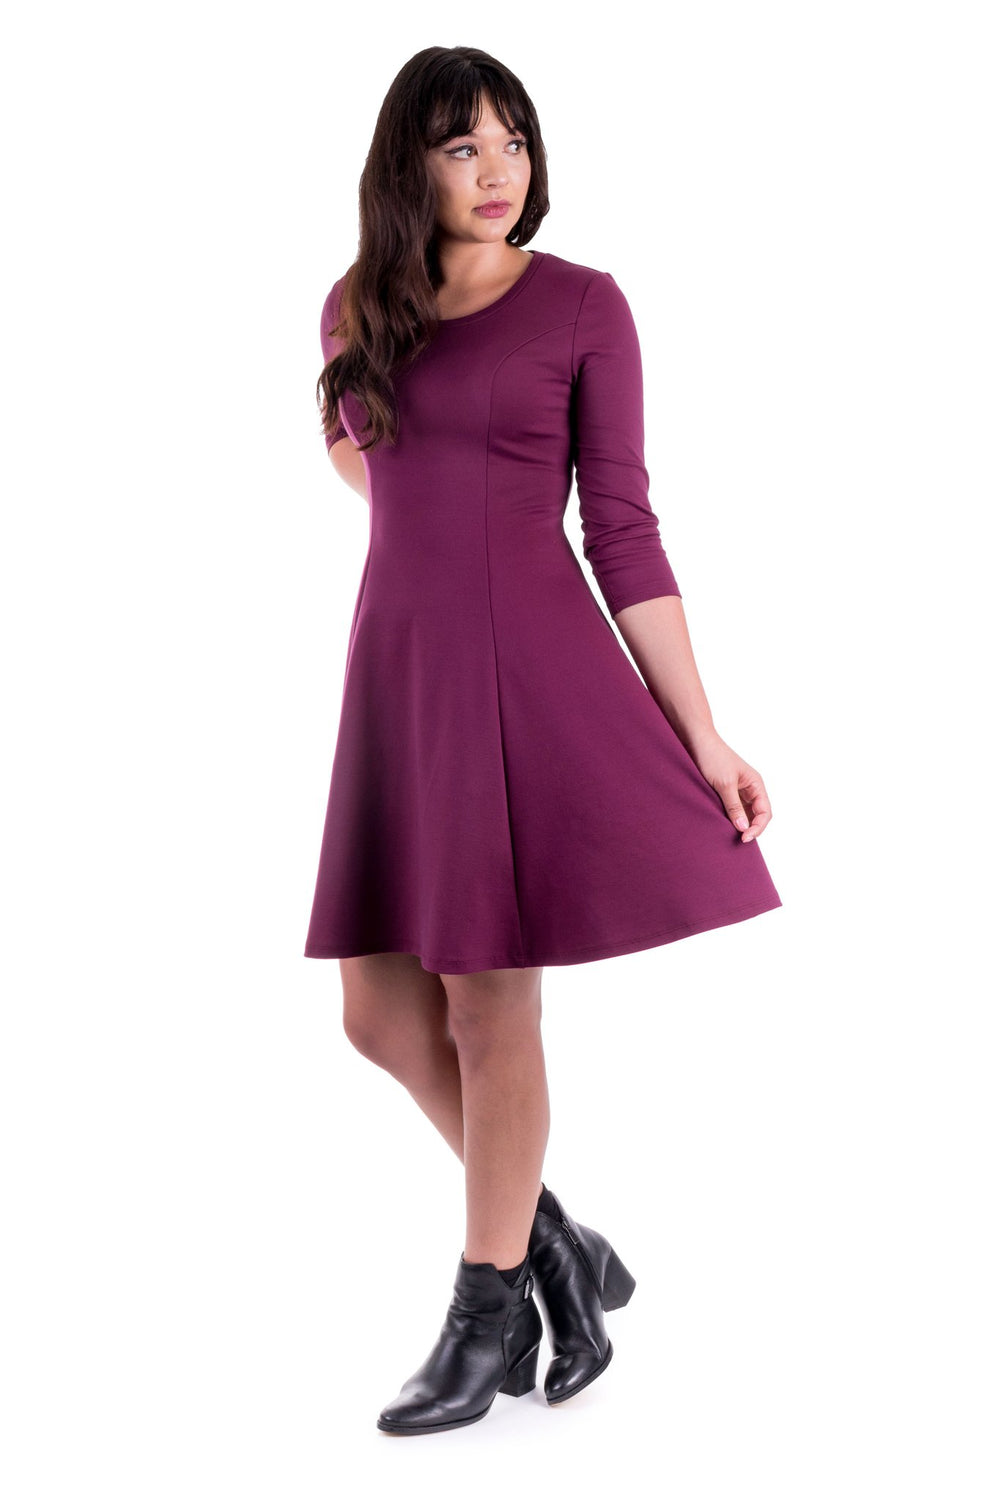 Woman wearing the Clementine Knit Dress sewing pattern by Forget-me-not Patterns. A knit dress pattern made in cotton jersey, viscose jersey, merino jersey, light to medium-weight double knits, or sweater knit fabrics, featuring an above knee finish, flar